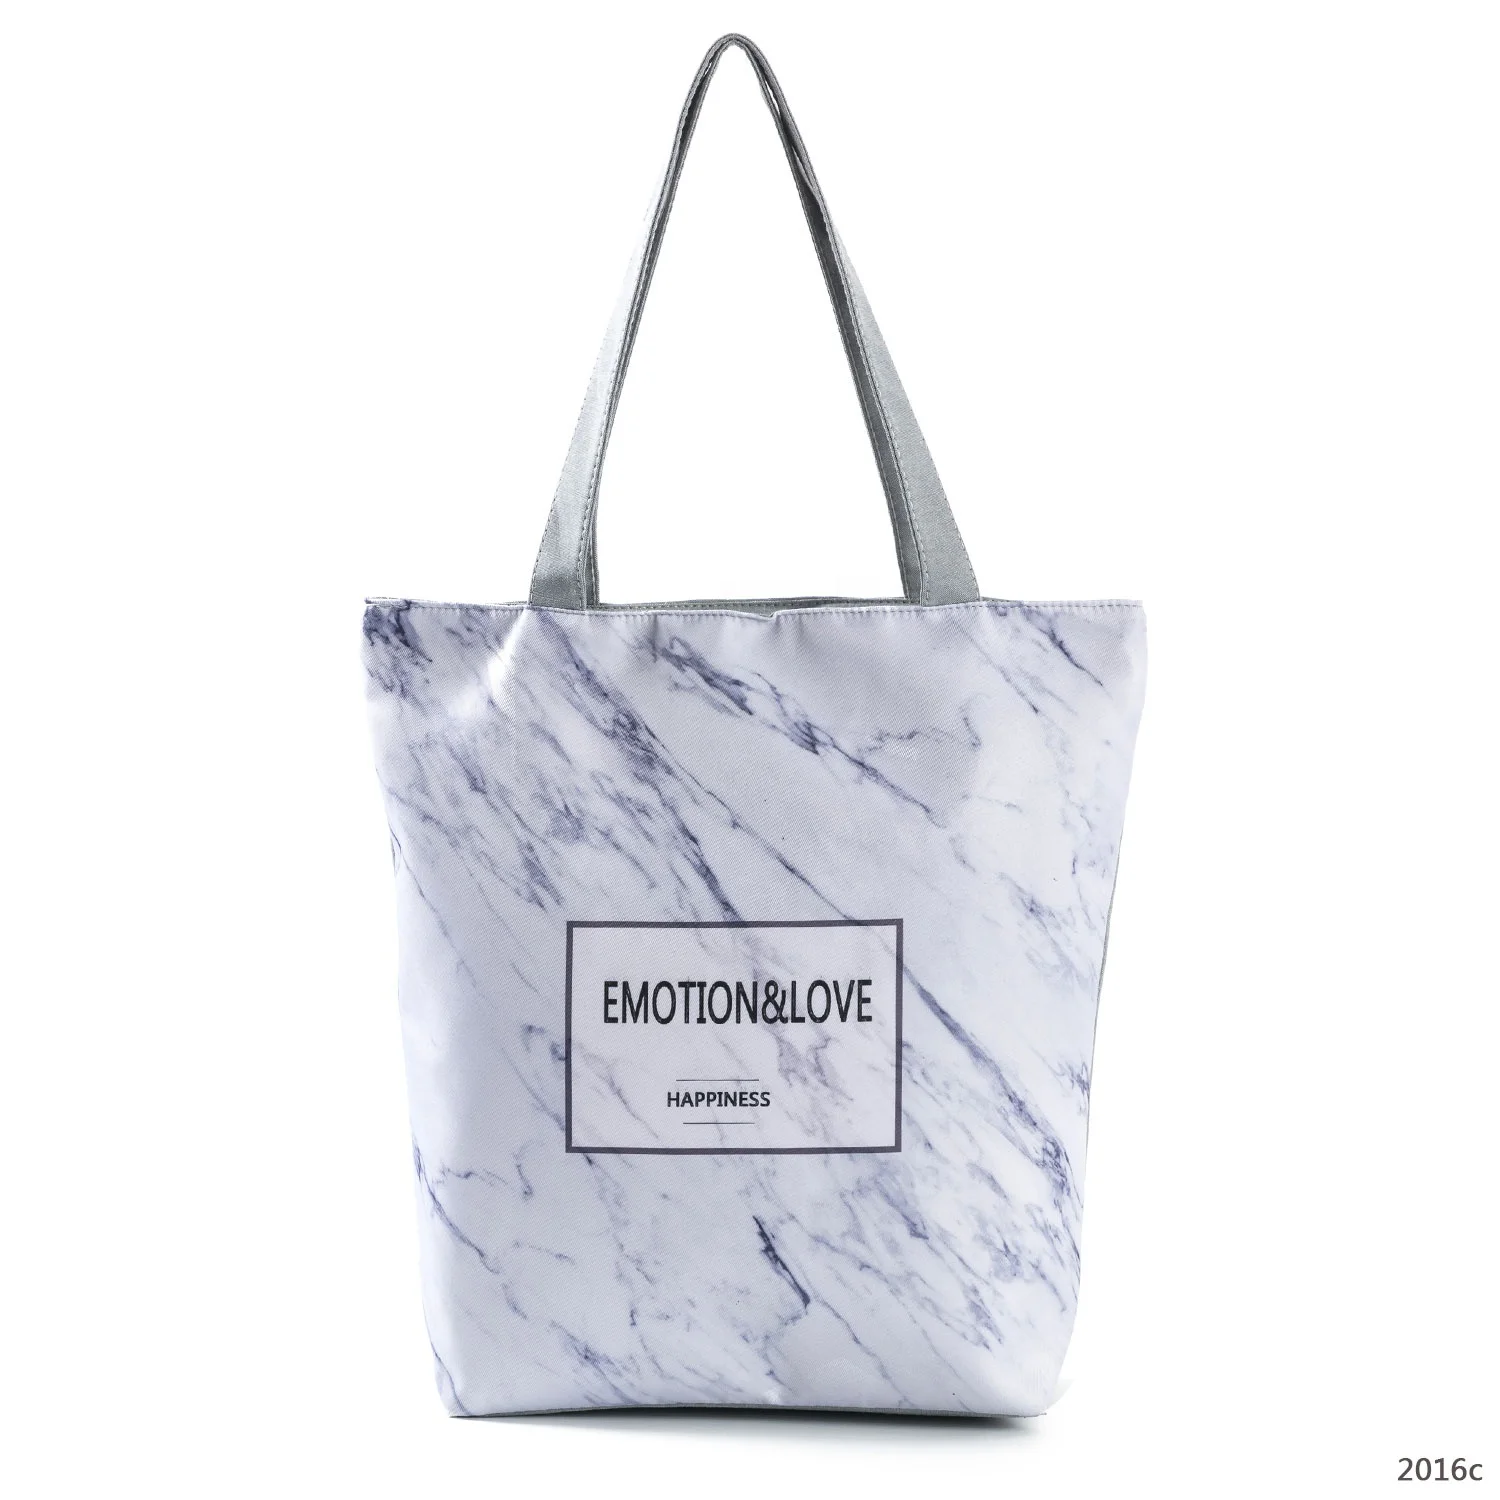 One Color Printed Cotton Tote Bag